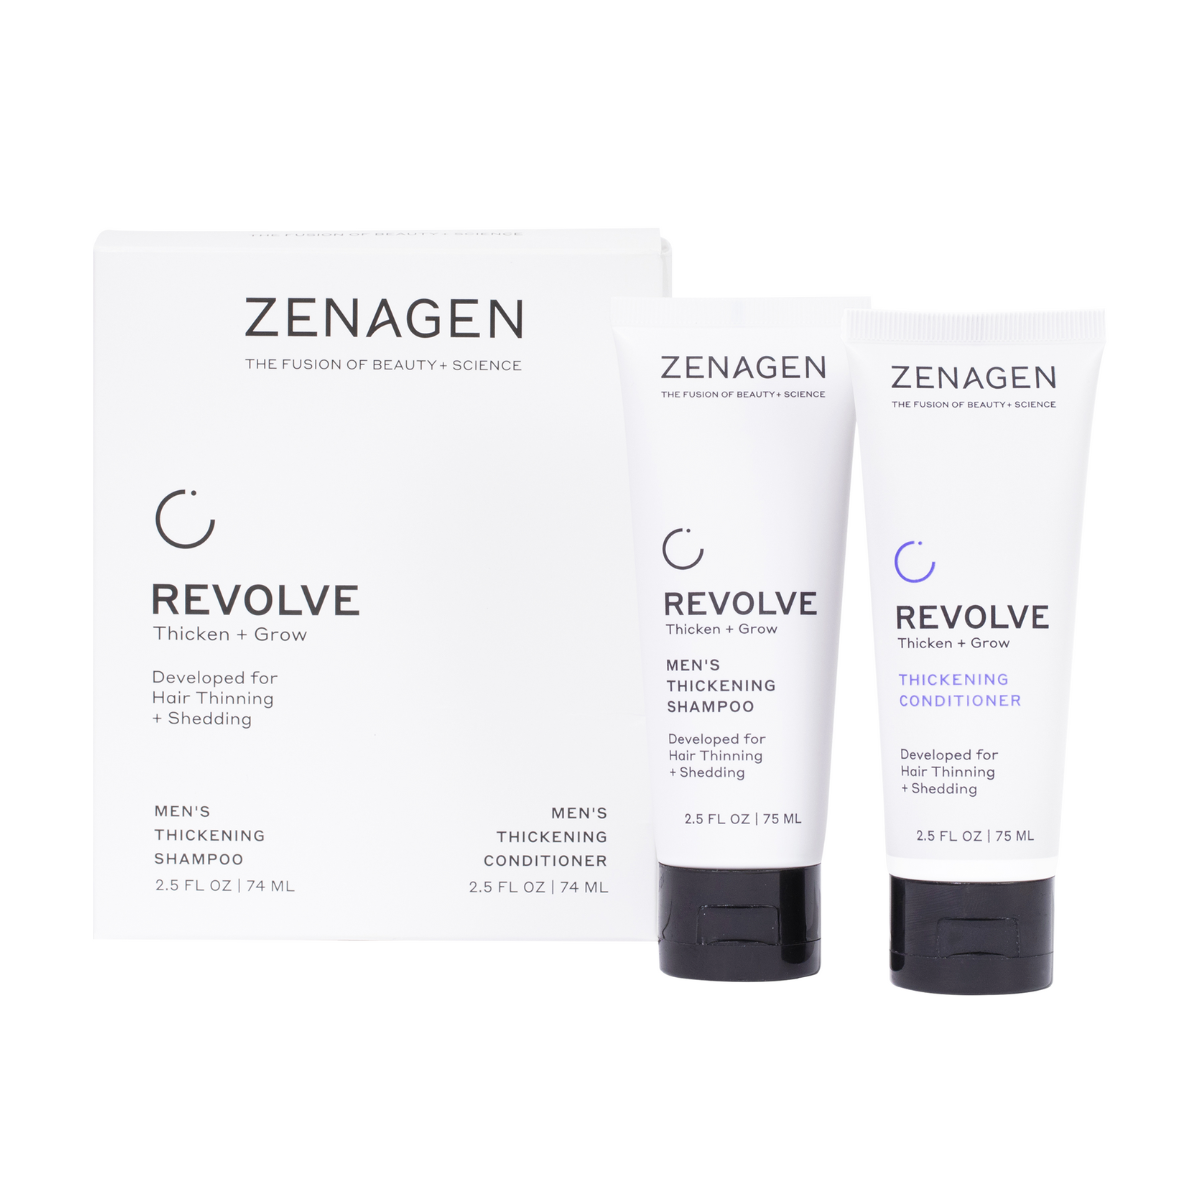 Zenagen Revolve Men's Thickening Shampoo and Conditioner Travel Kit For Thinning Hair Shop At Exclusive Beauty